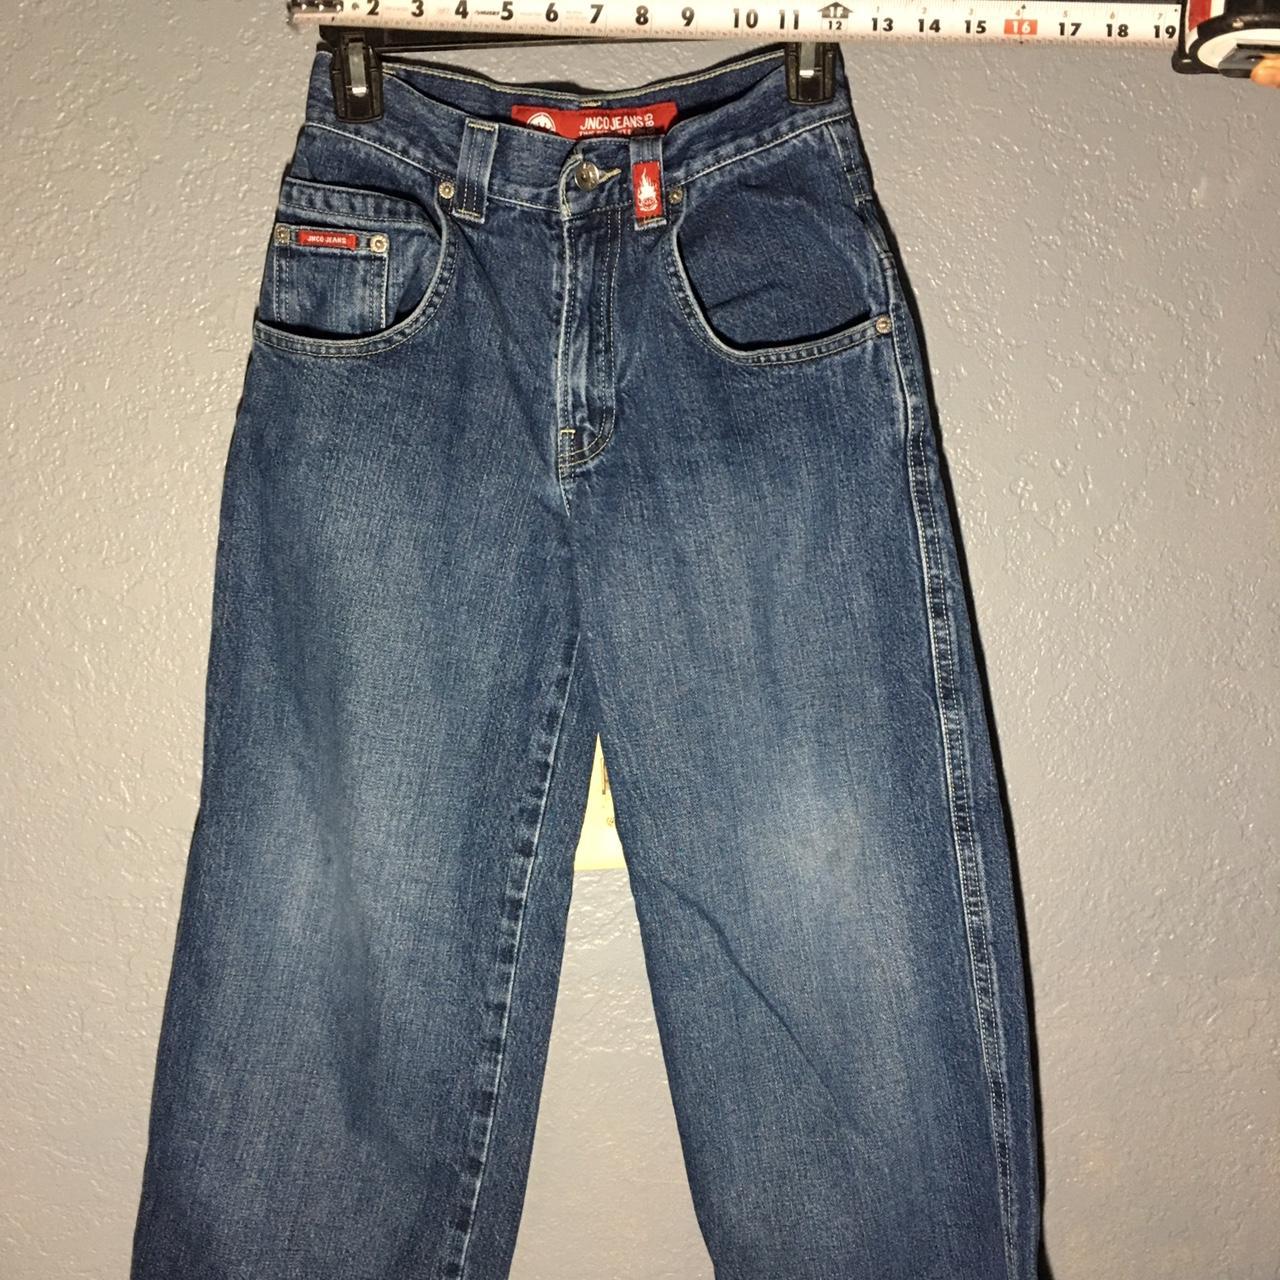 Jnco jeans any flaw will be visible on pics. size 10... - Depop